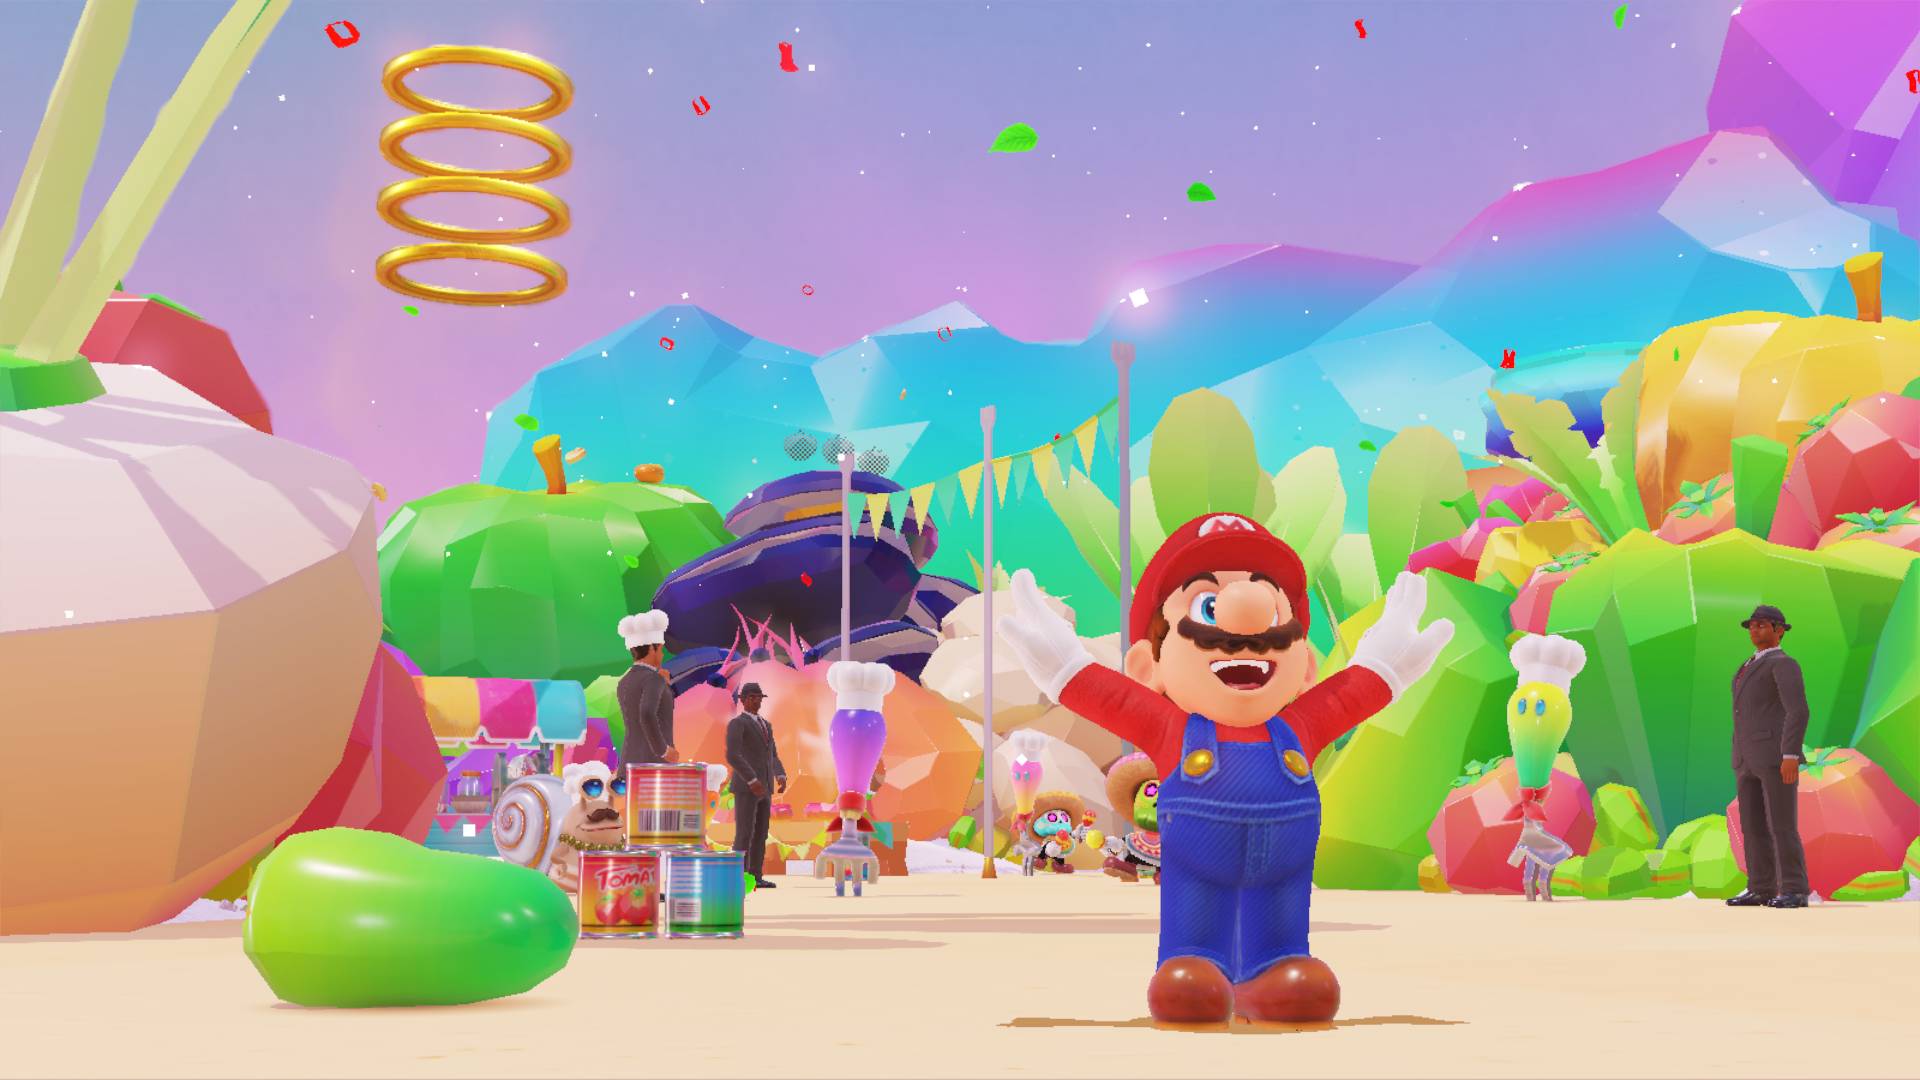 Is Super Mario Odyssey 2 In Development? – Load the Game